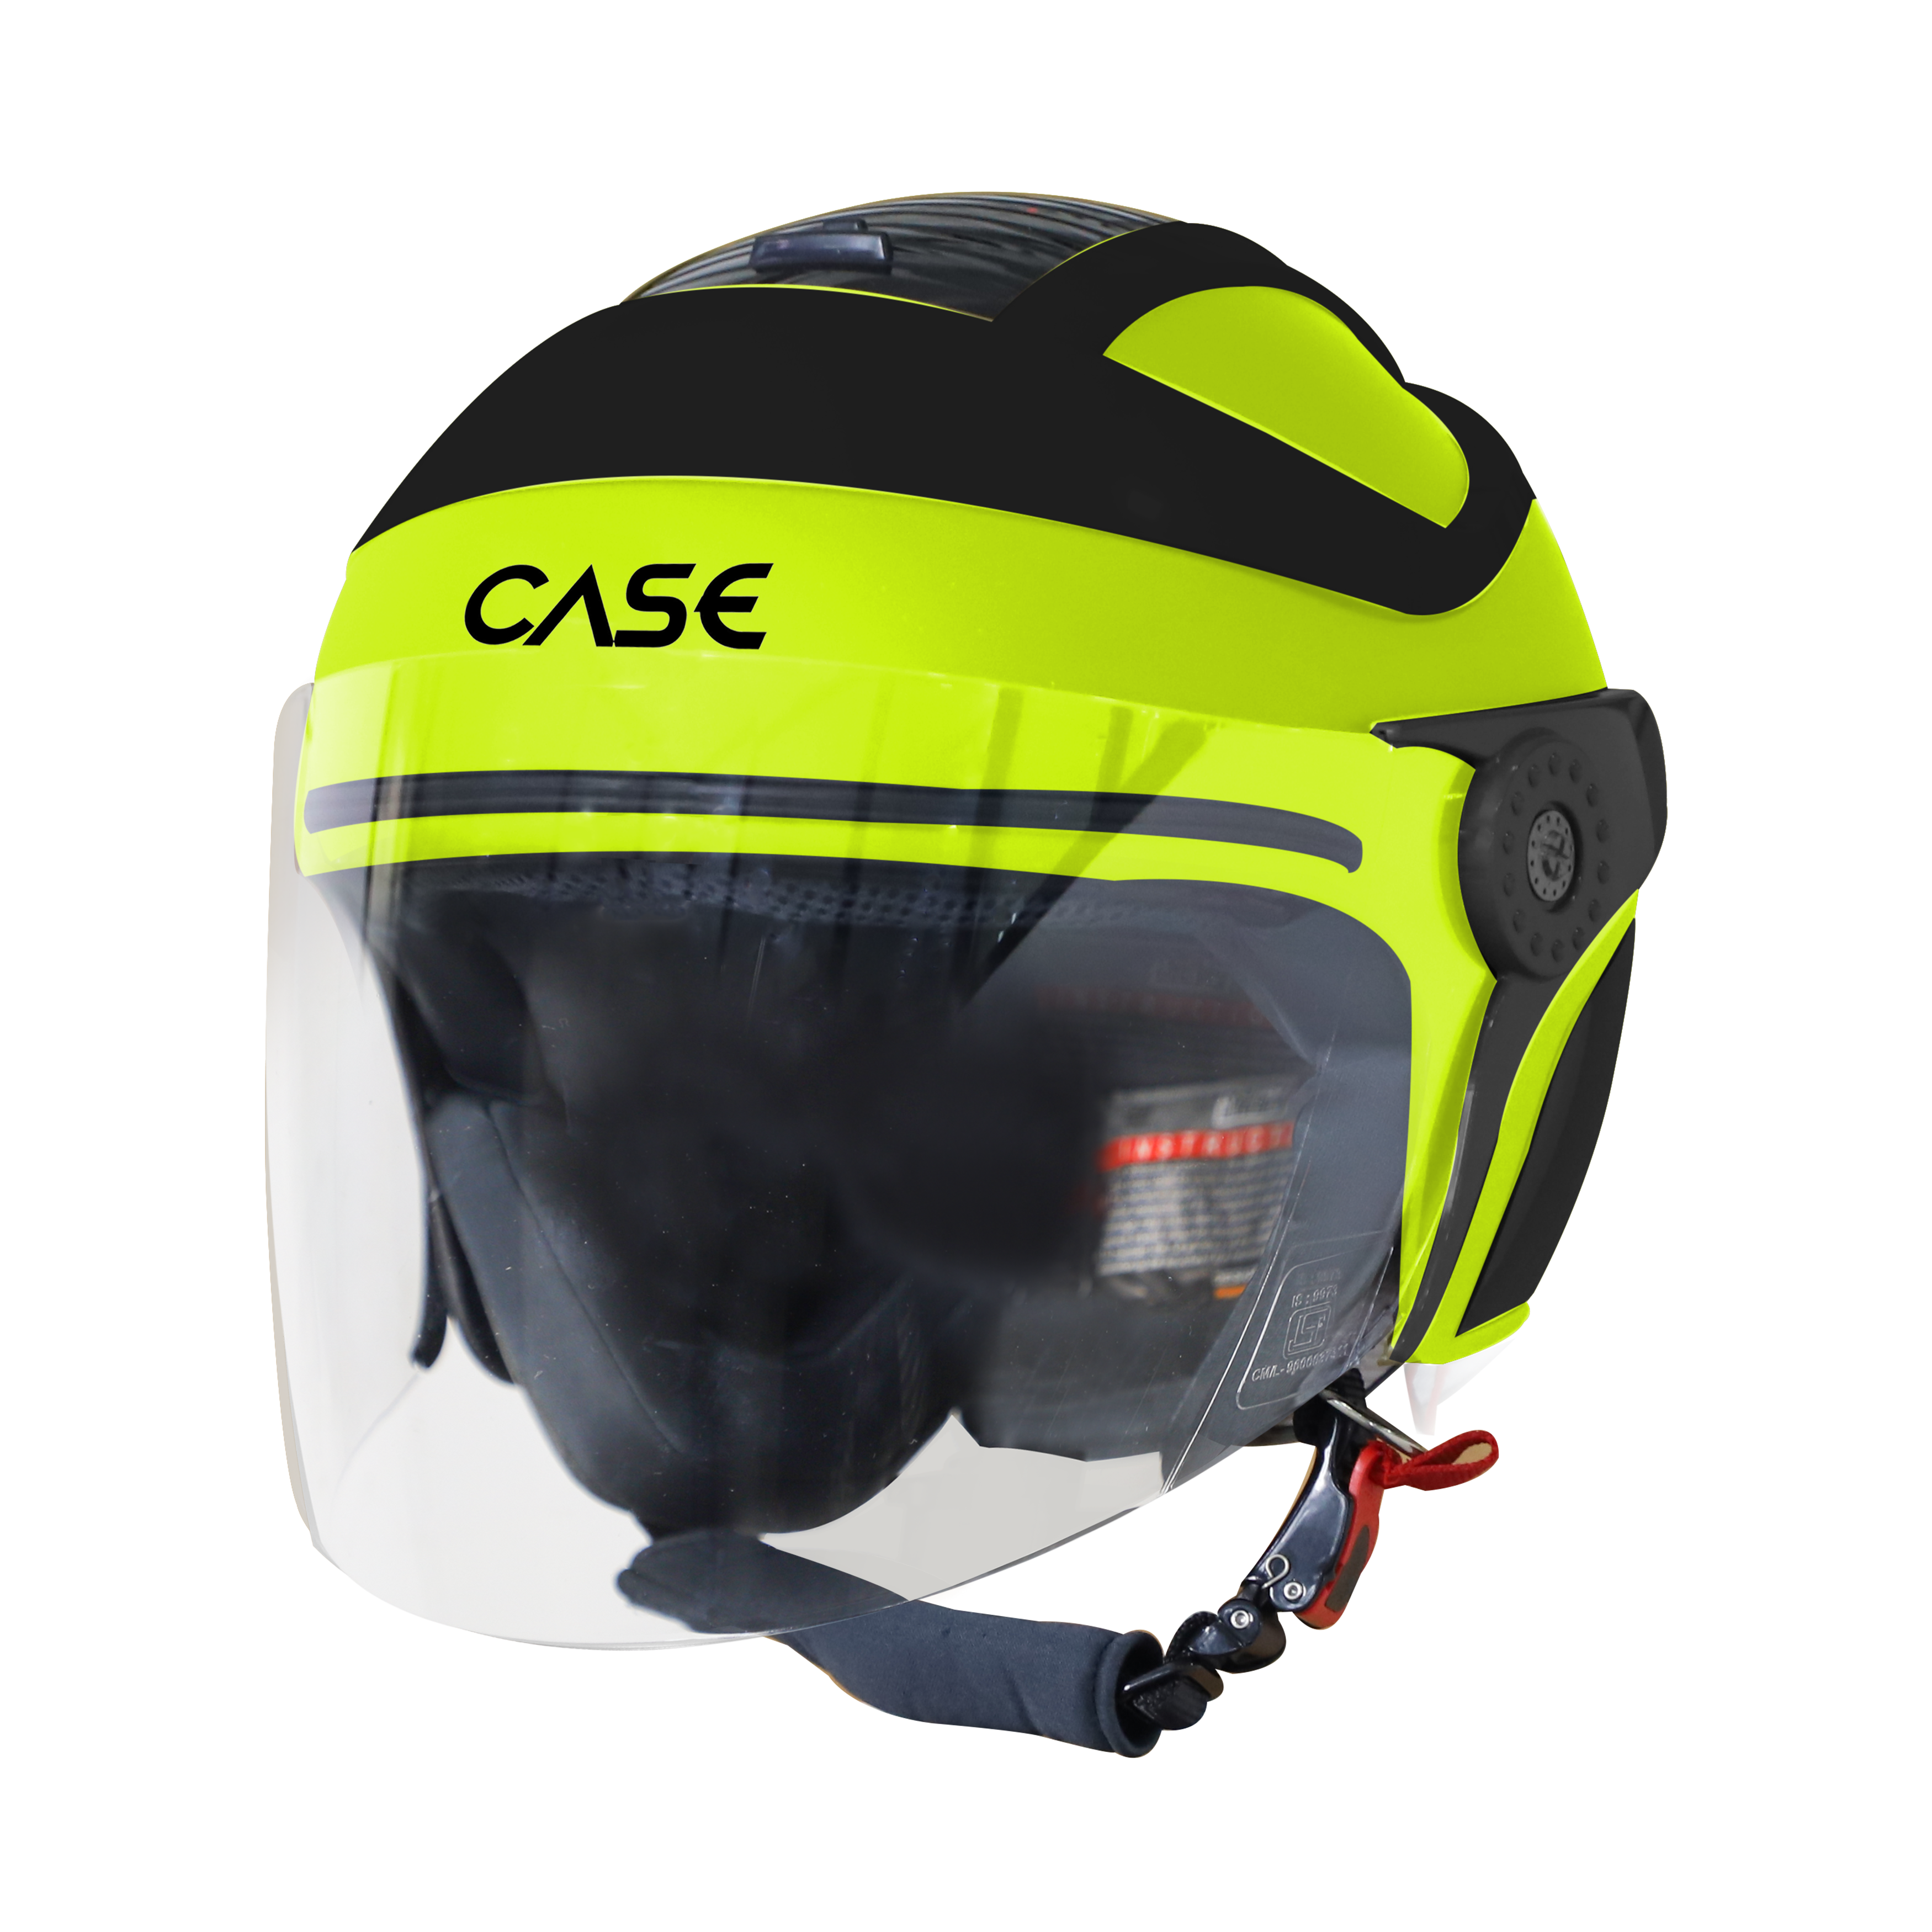 SB-29 CASE GLOSSY FLUO NEON WITH BLACK